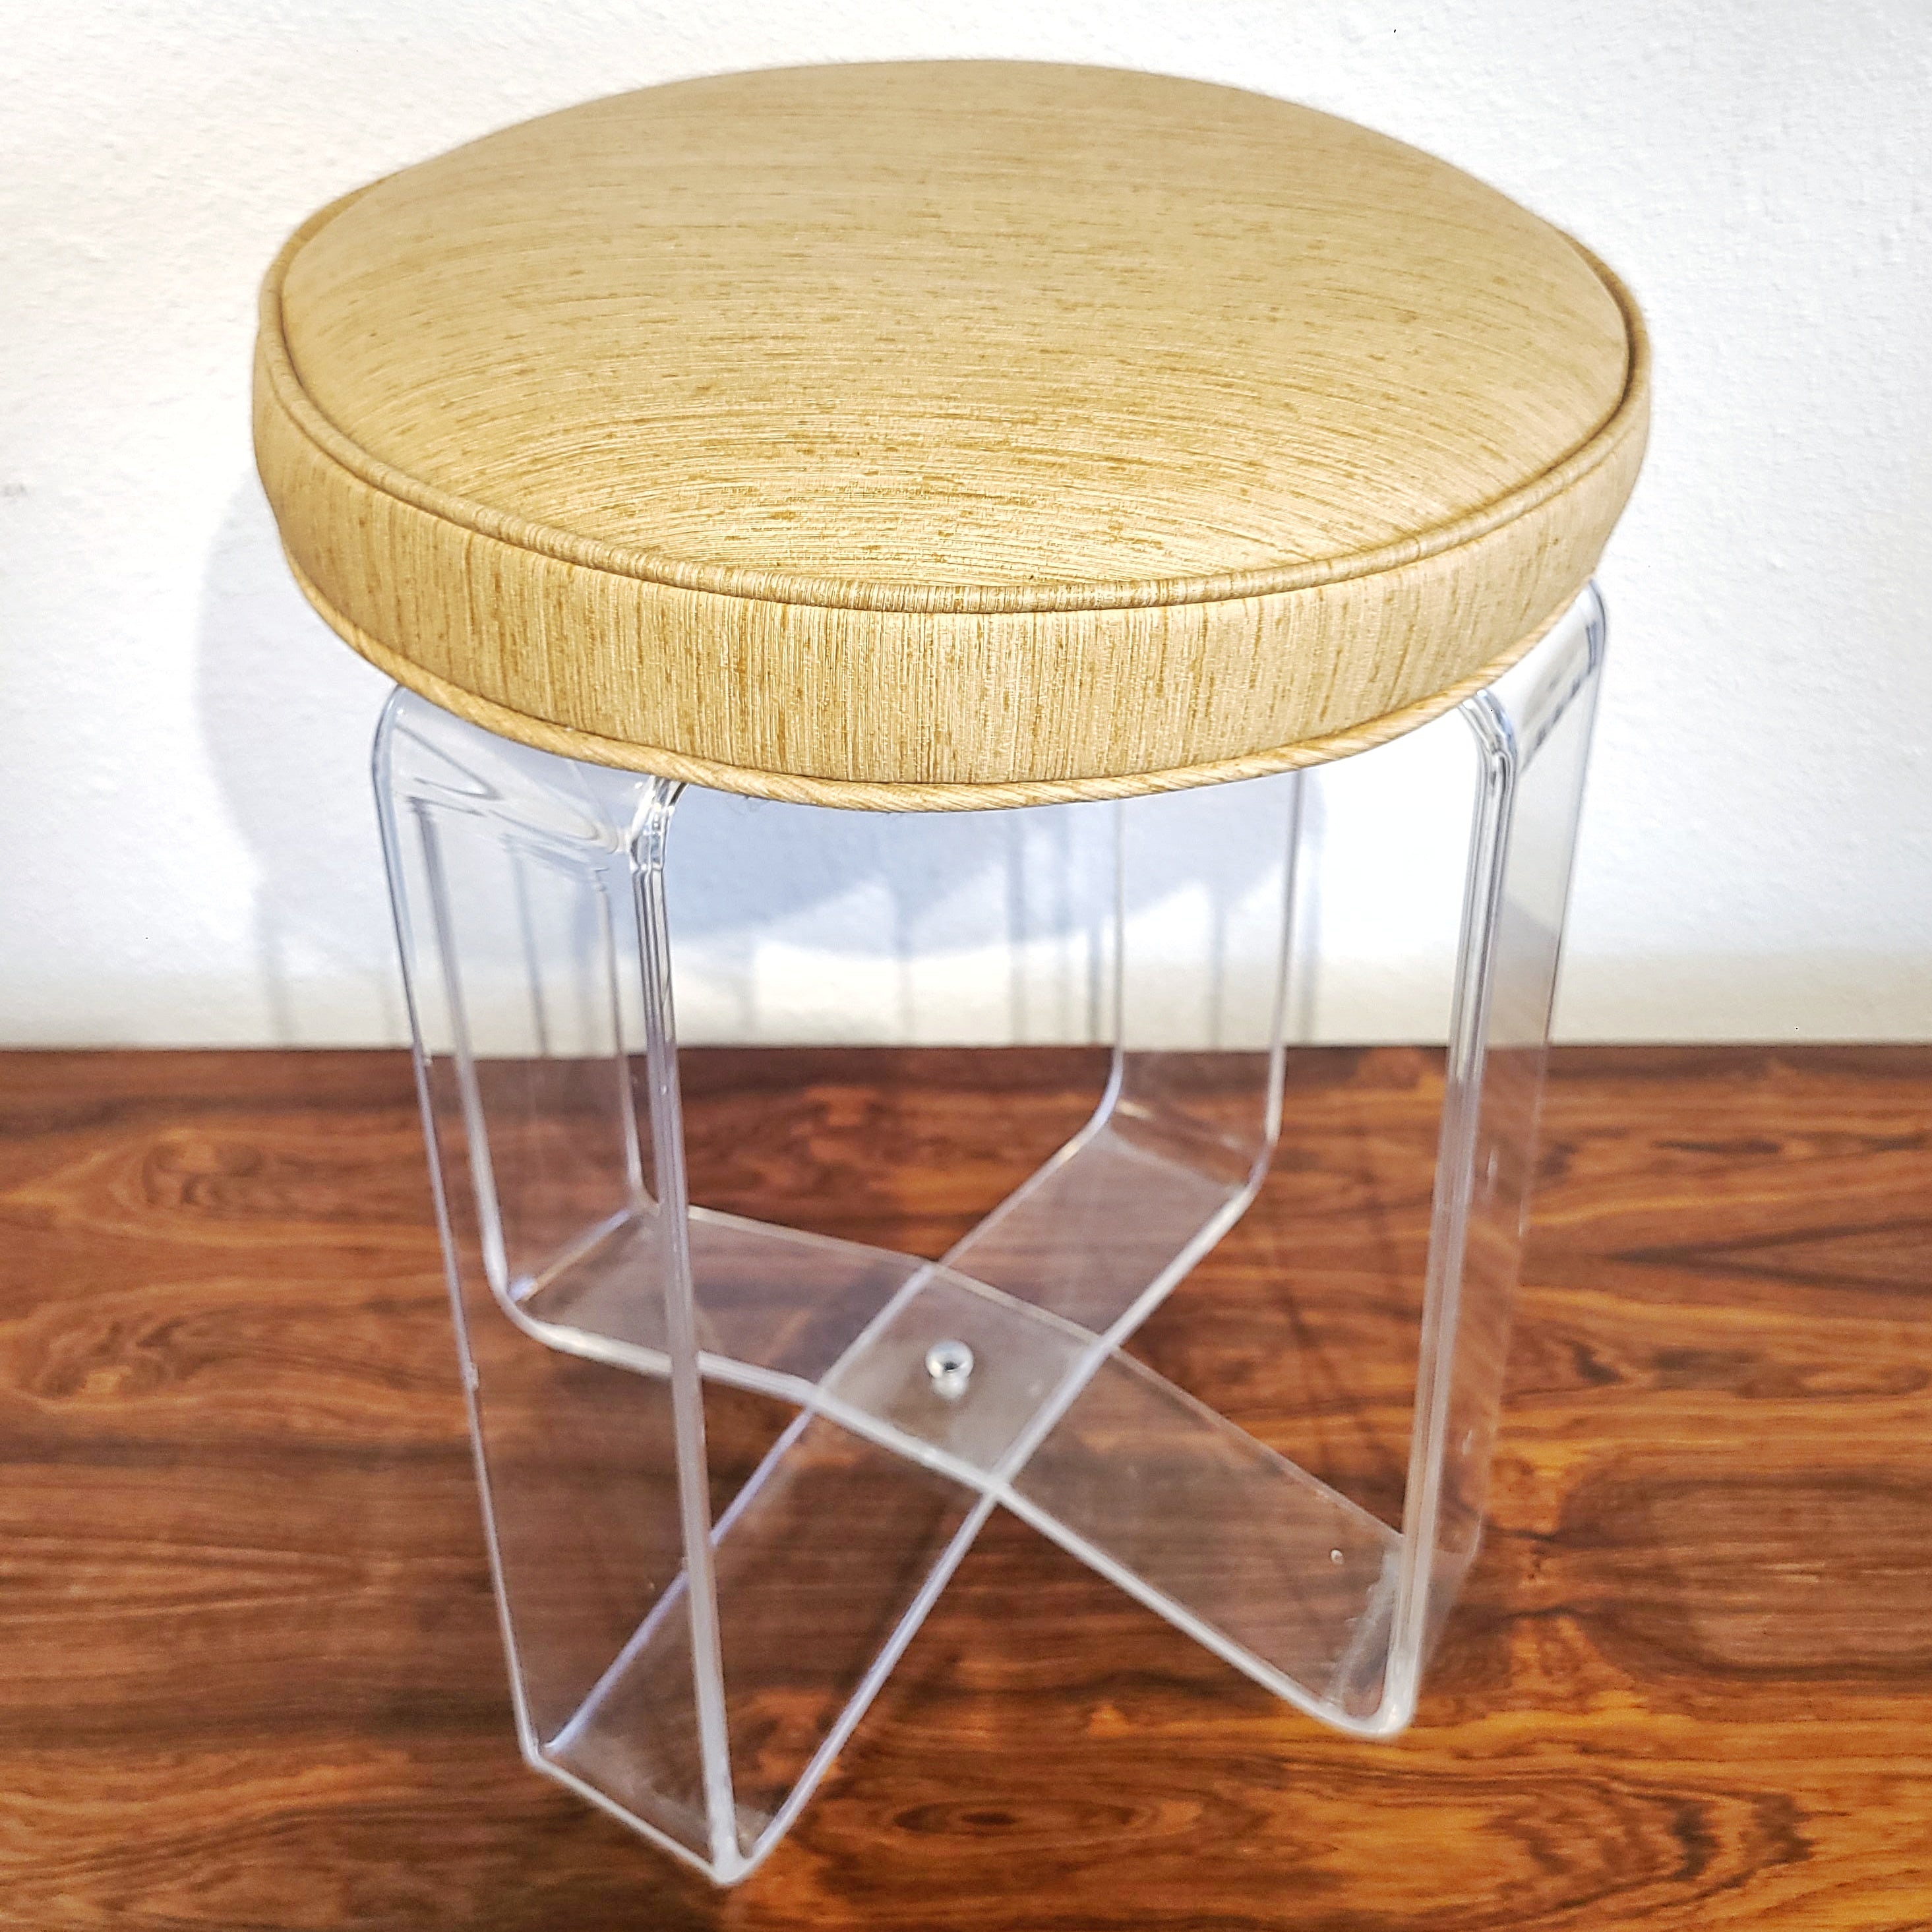 VINTAGE LUCITE STOOL WITH TEXTURED VINYL UPHOLSTERY